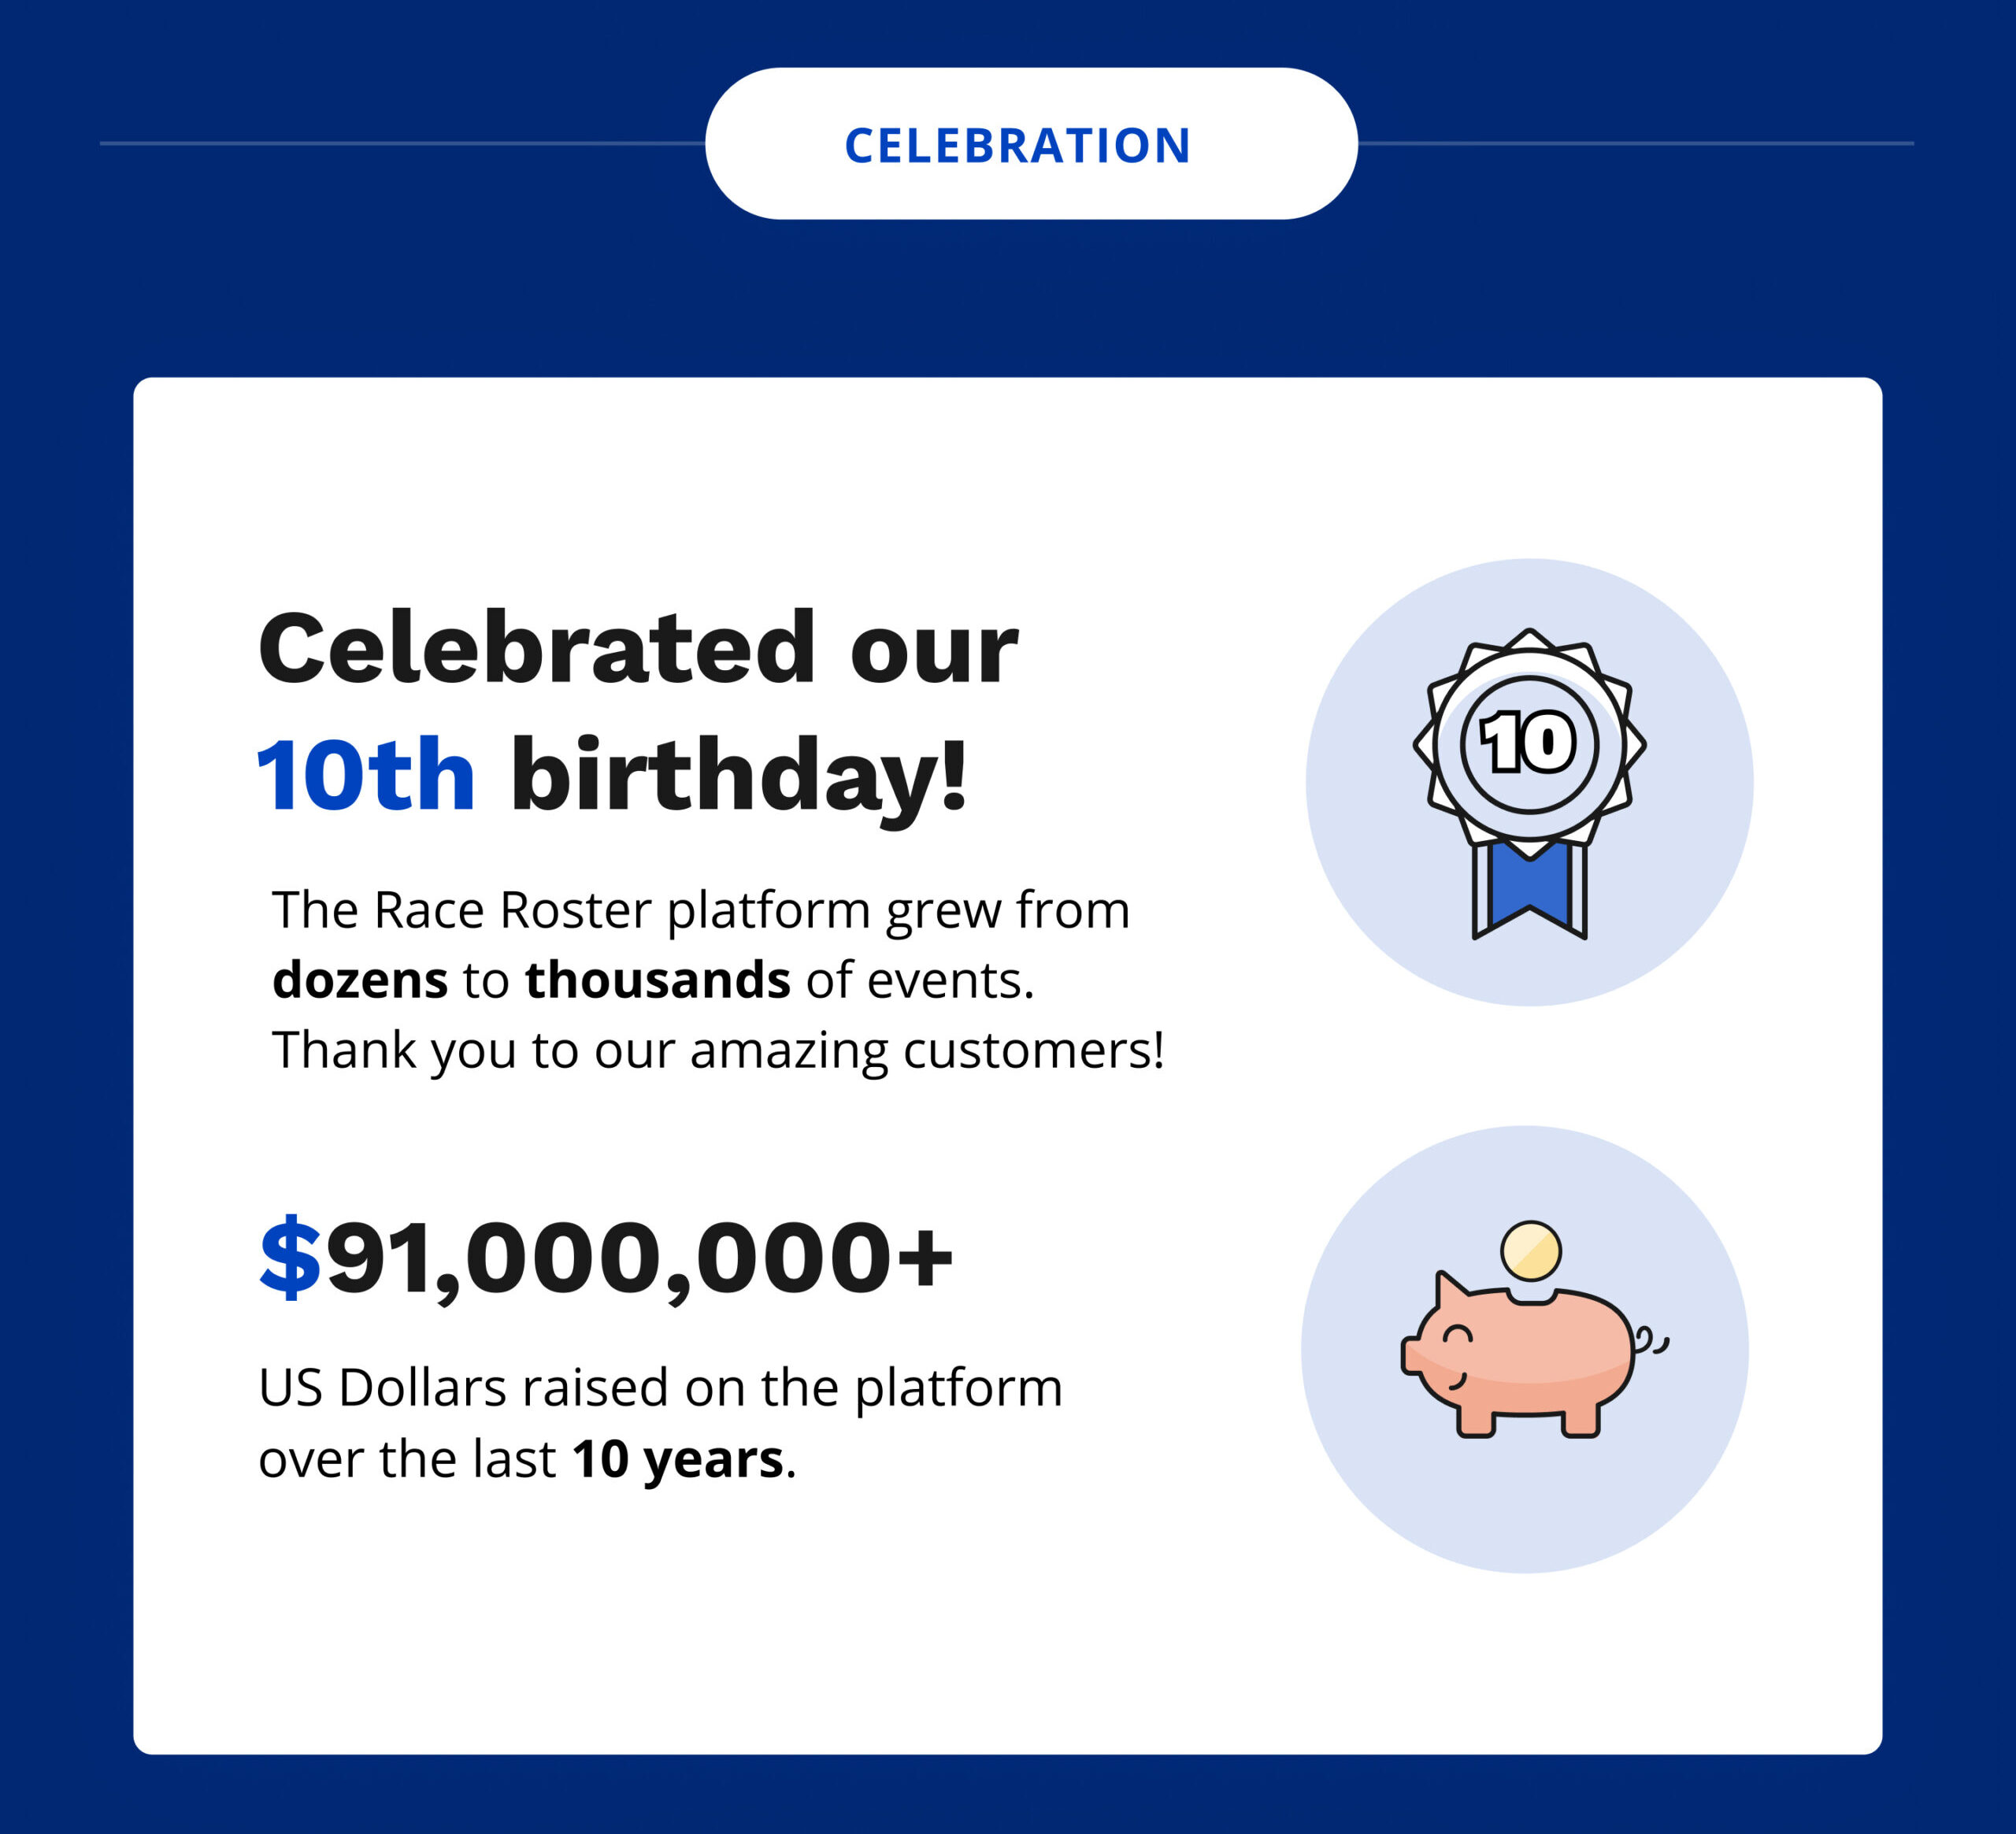 Celebration: Celebrated our 10th birthday! The Race Roster platform grew from dozens to thousands of events. Thank you to our amazing customers! $91,000,000+ US dollars raised on the platform over the last 10 years.